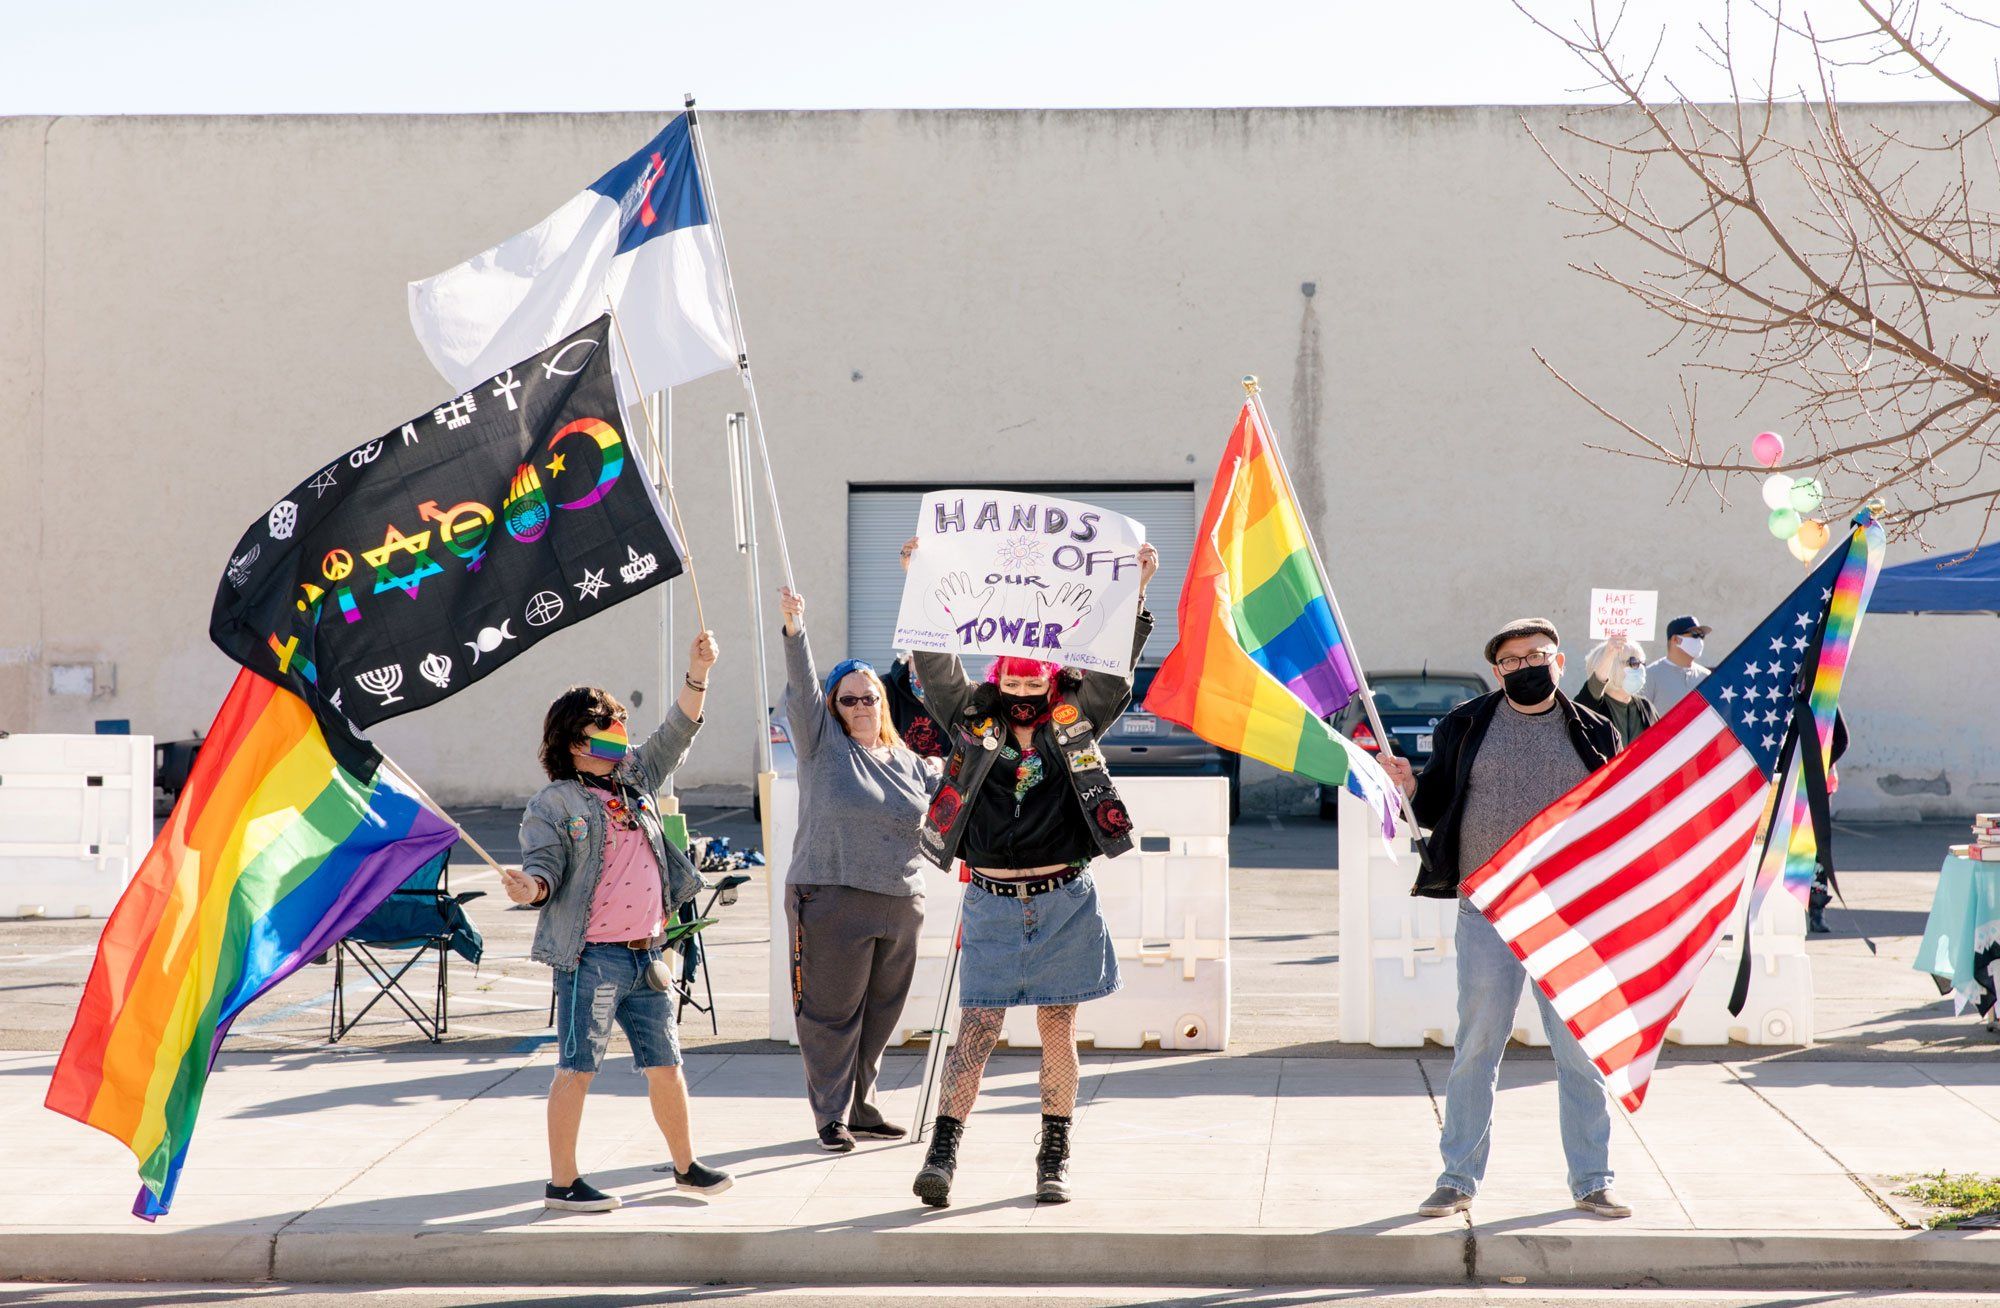 Protesters wave rainbow flags, an American flag and a coexist flag on the sidewalk across the street from the Tower Theatre. A counter protester is in the background waving a white flag containing a red cross.